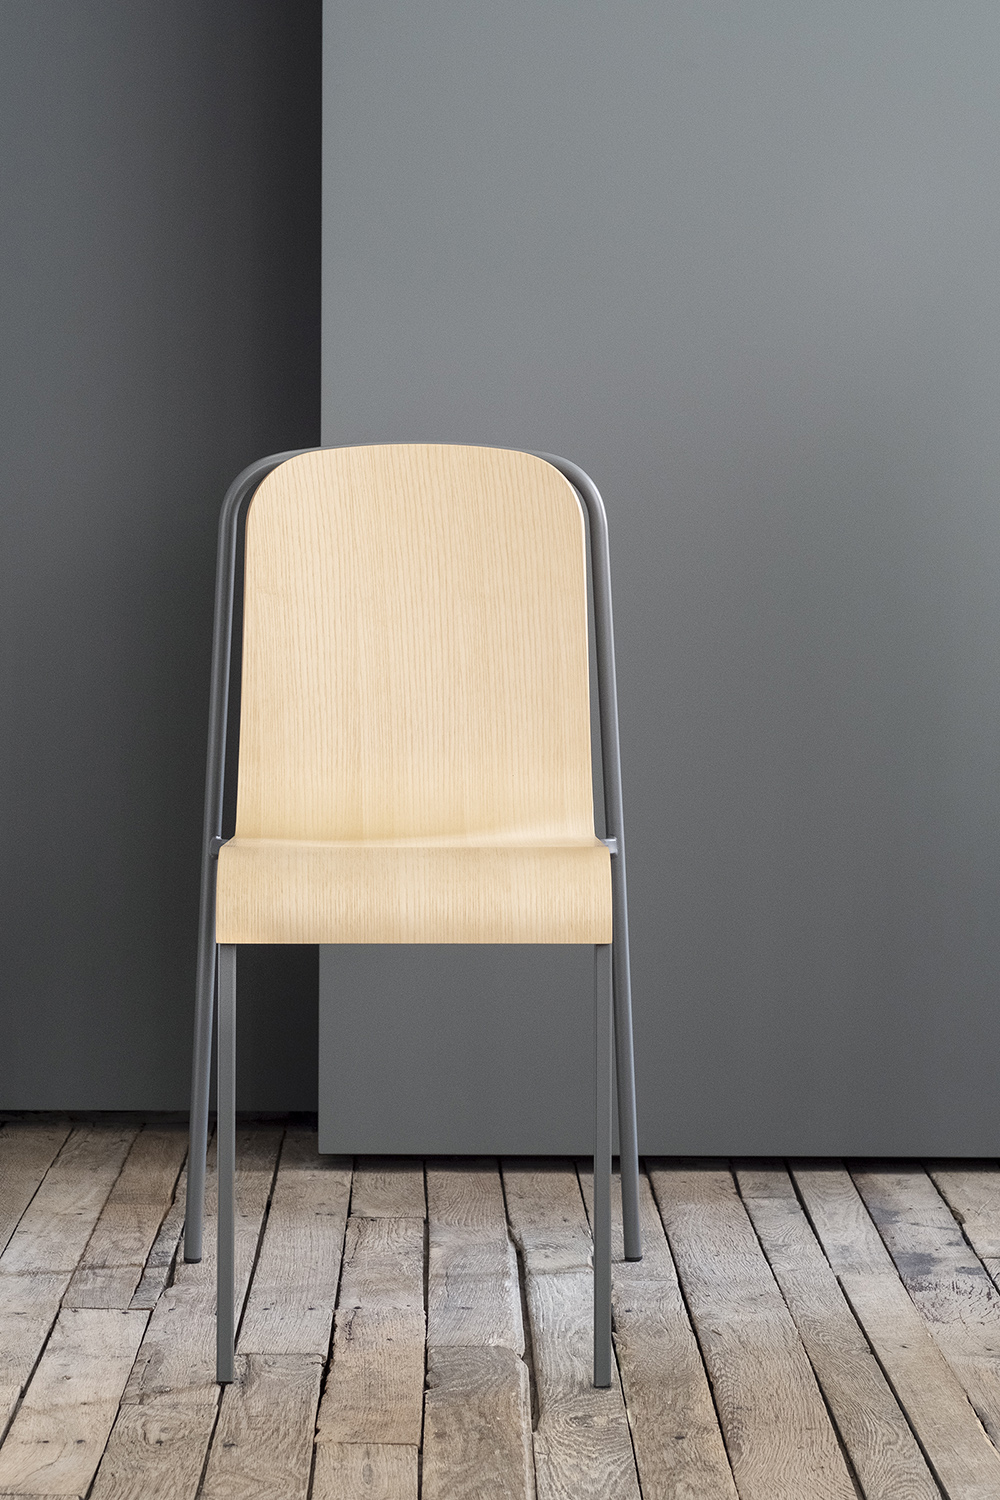 Mue stackable chair, manufactured by Livoni